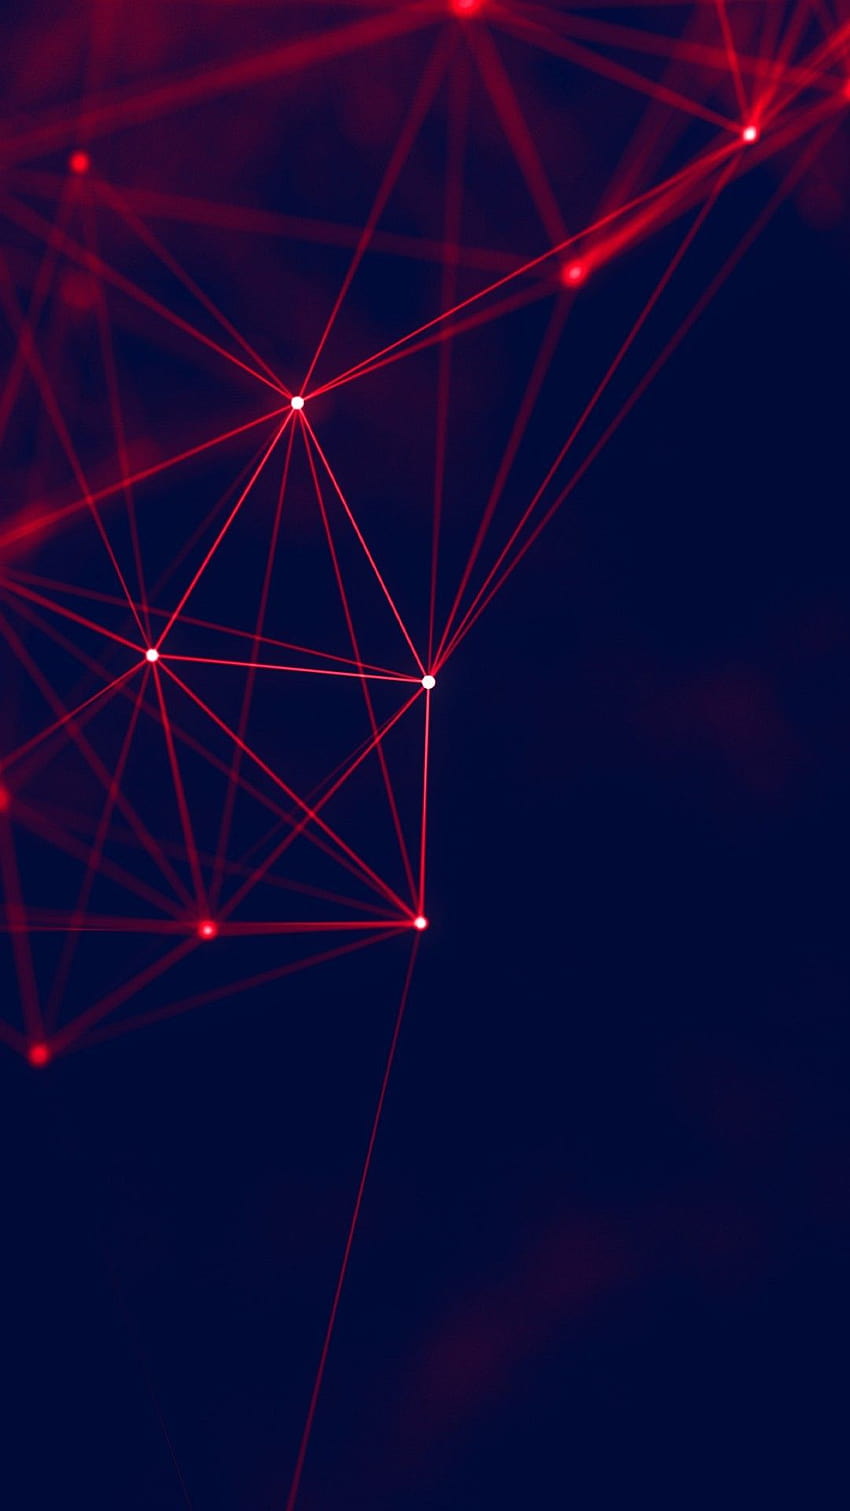 1080x1920 Red Connections, Geometry, Cyber​​space for iPhone 8, iPhone 7 Plus, iPhone 6+, Sony Xperia Z, HTC One, ジオメトリ 1080x1920 HD電話の壁紙